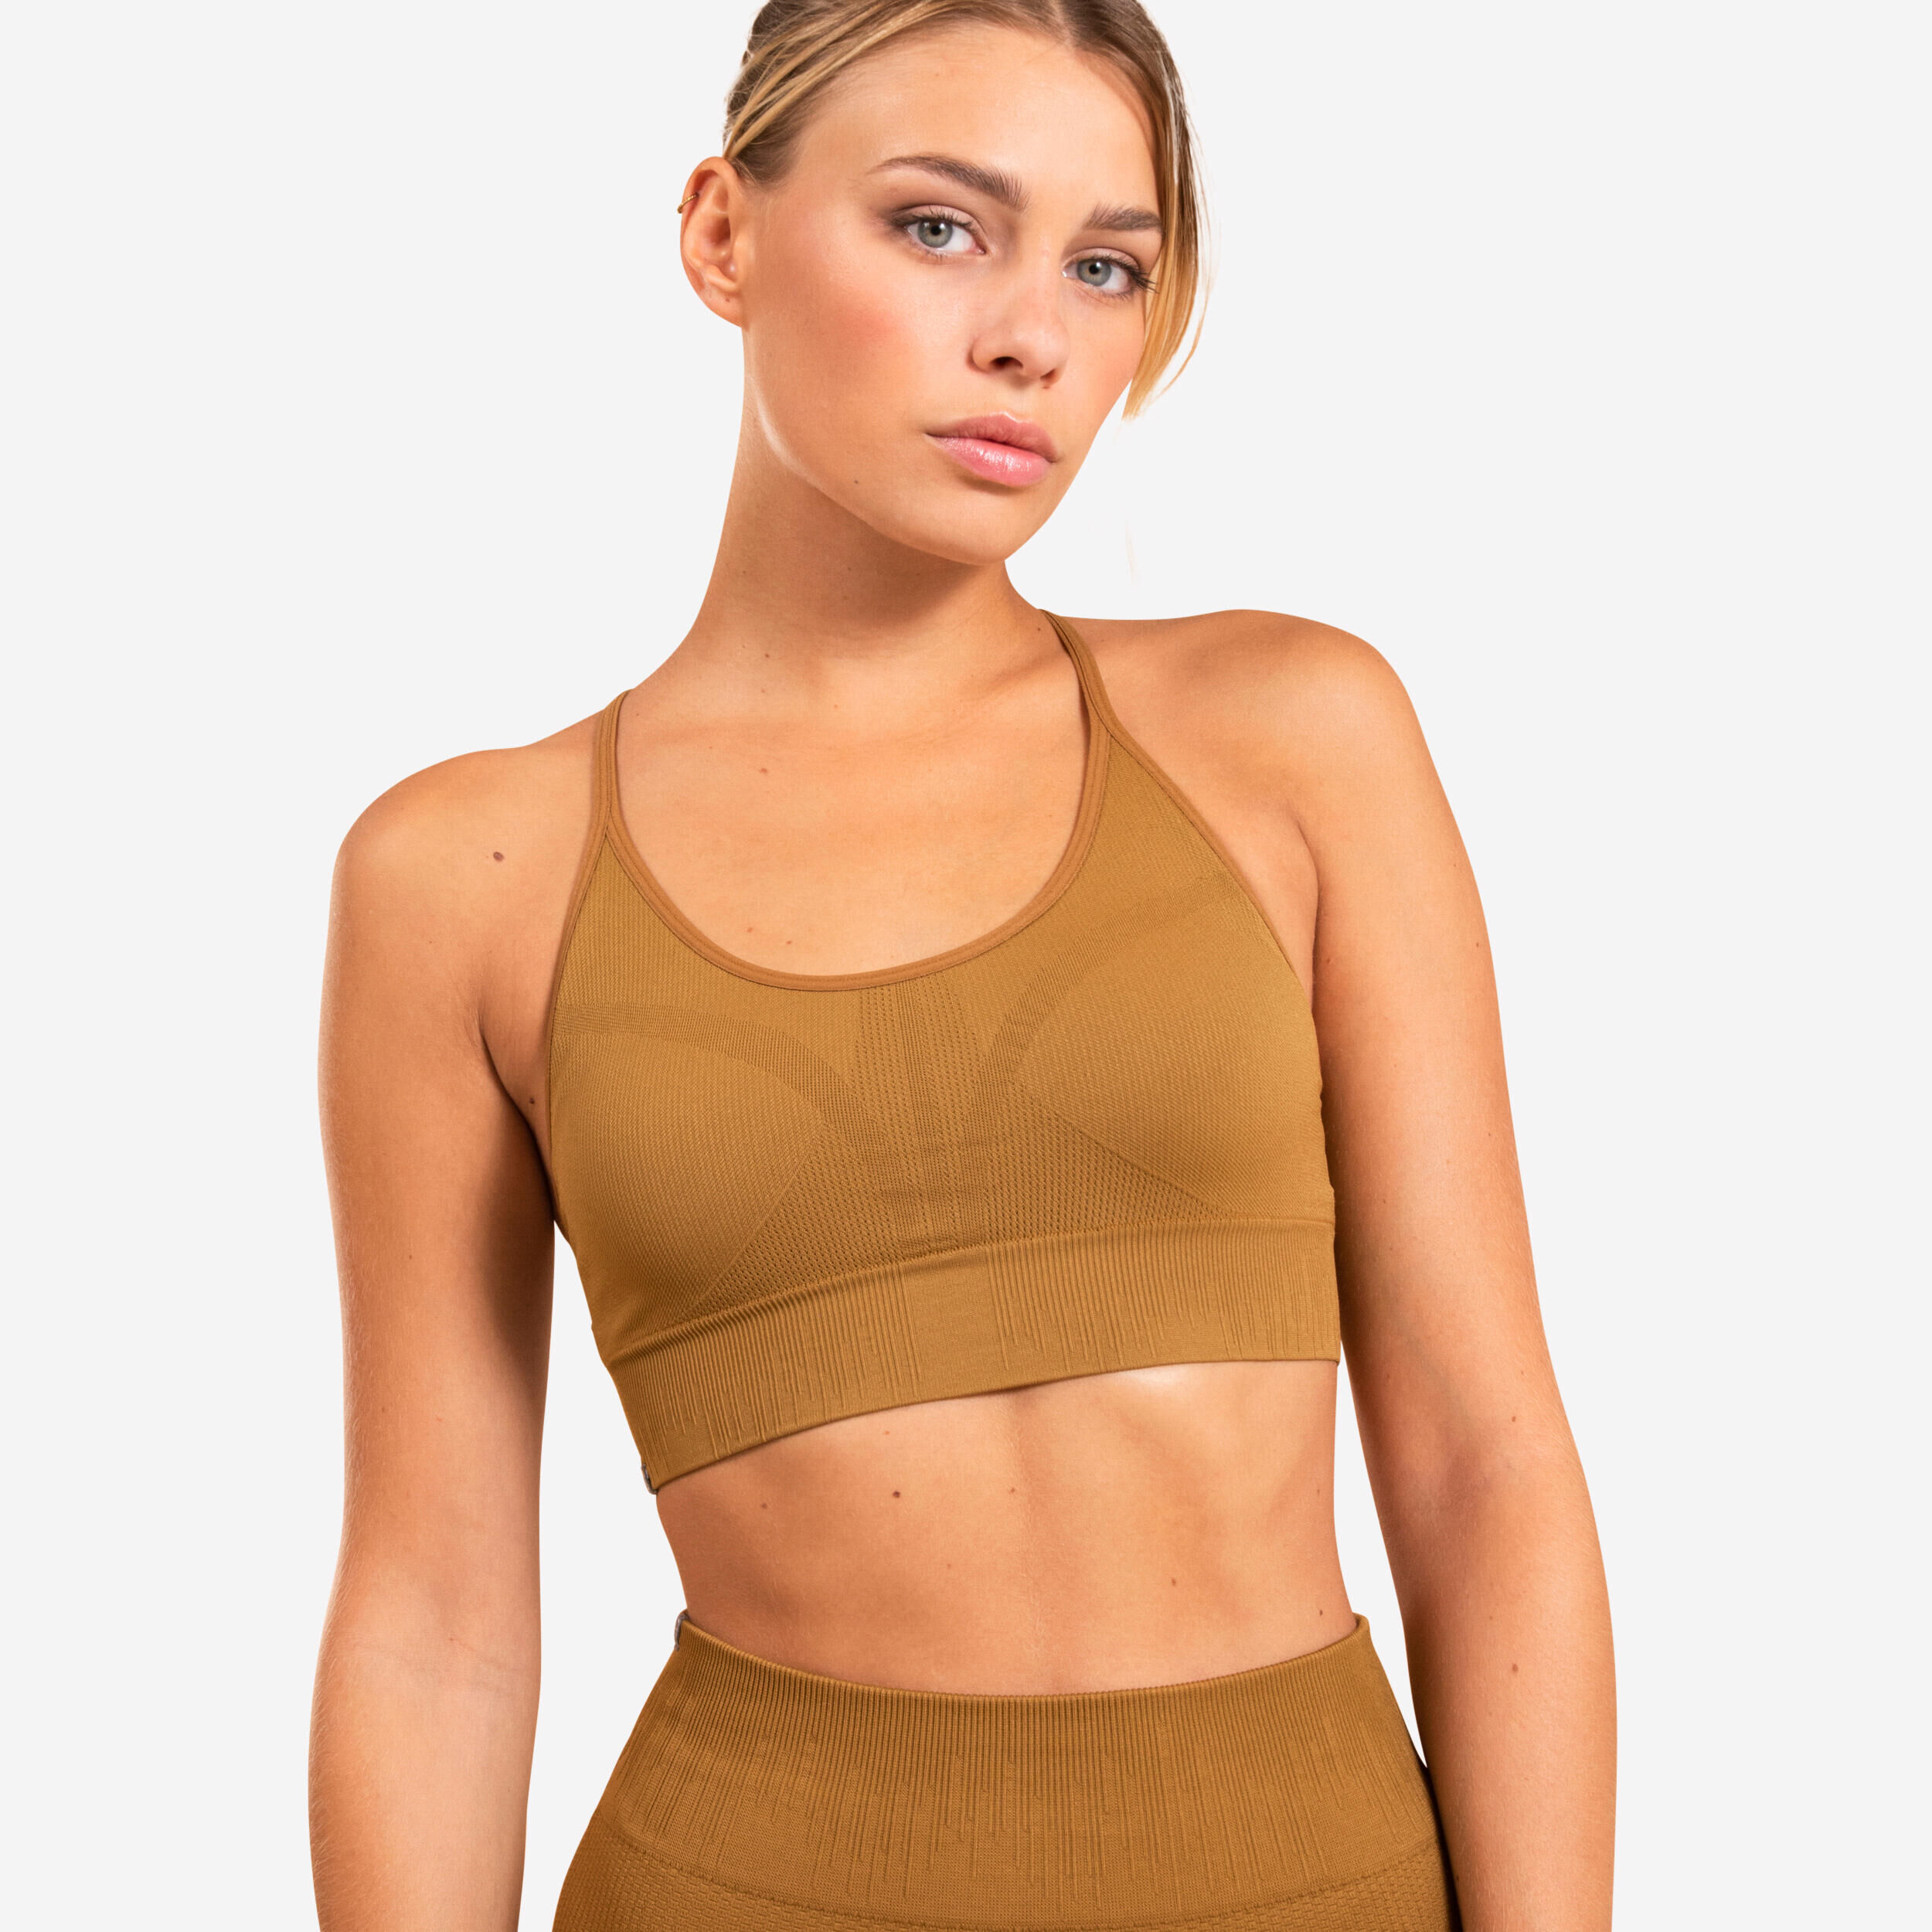 Women's invisible sports bra with high-support cups - Beige